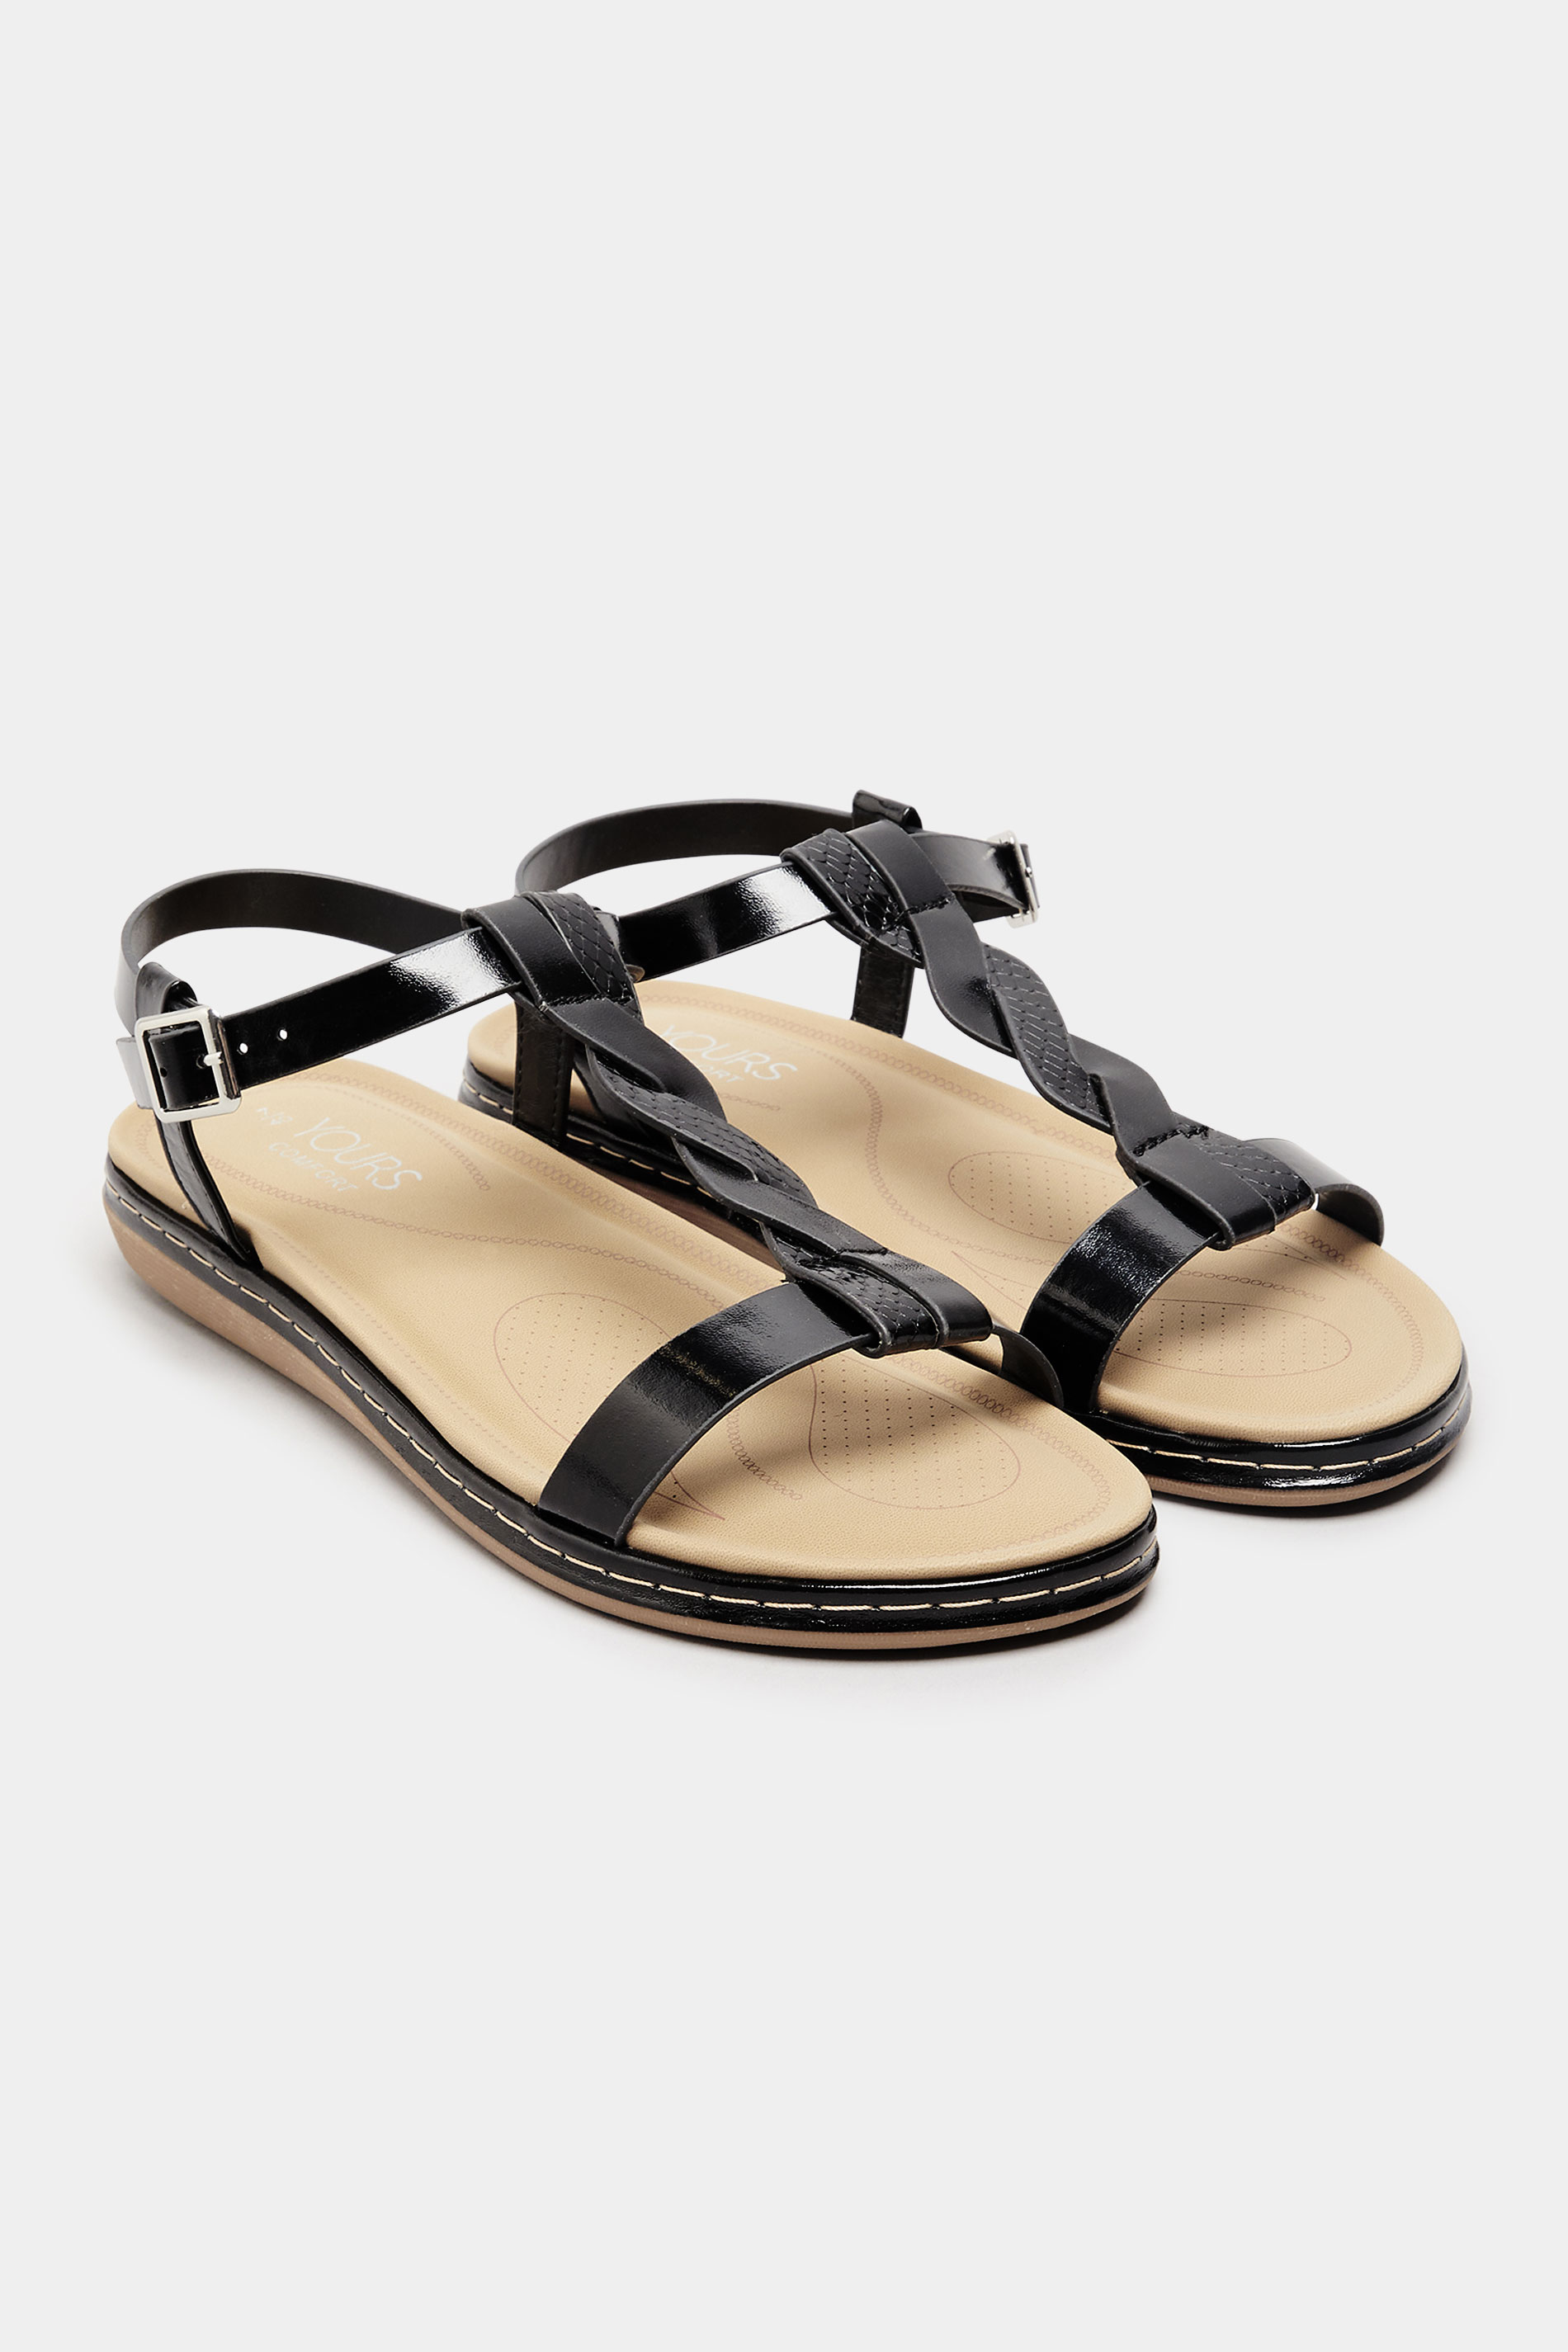 Black Patent Plaited Strap Sandals In Extra Wide EEE Fit_A.jpg